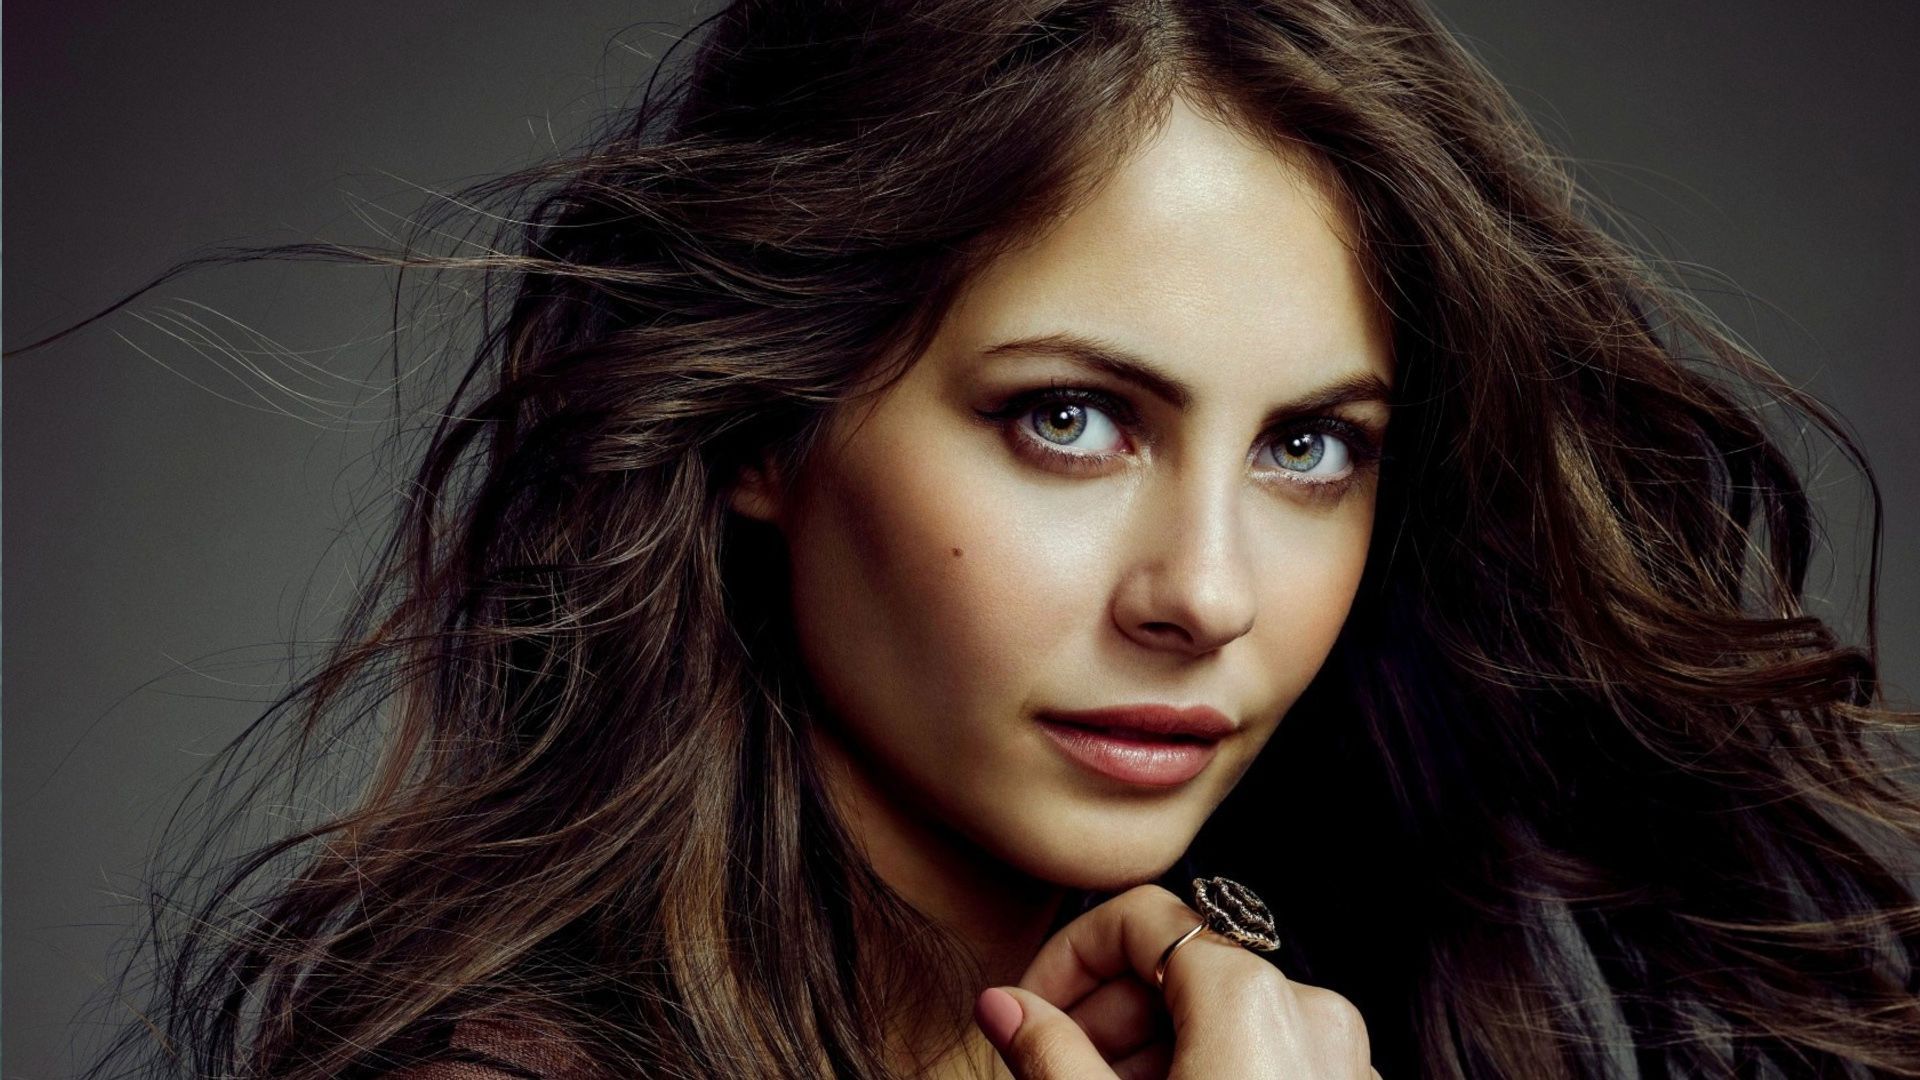 HD Willa Holland Wallpapers – HdCoolWallpapers.Com